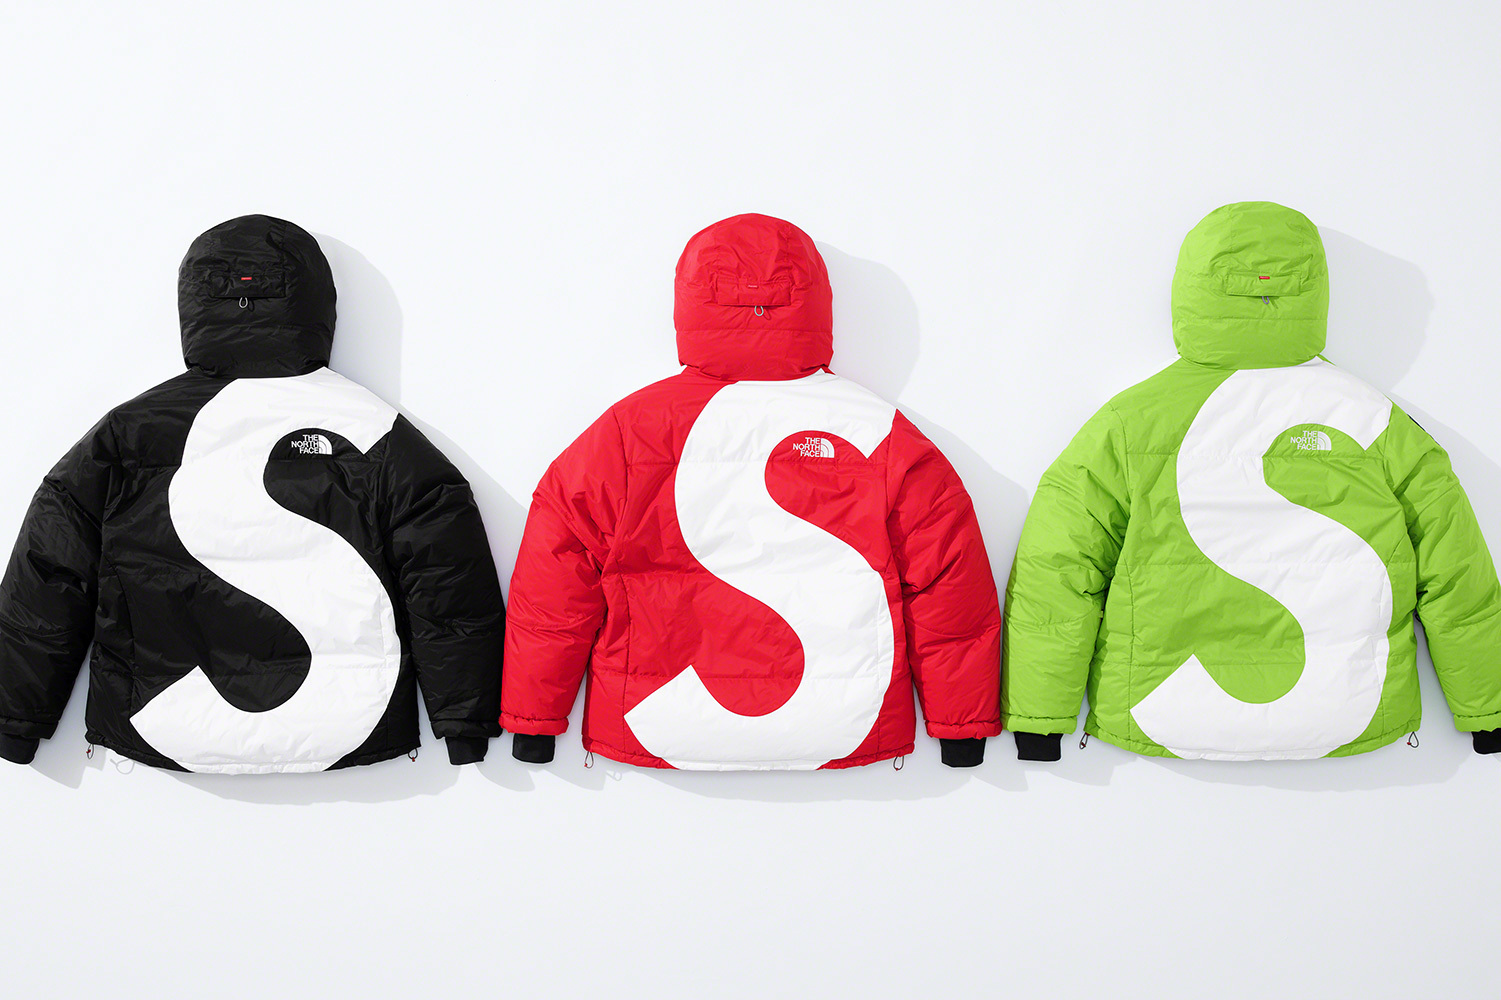 Supreme x The North Face Fall 2020 “S Logo” Collection